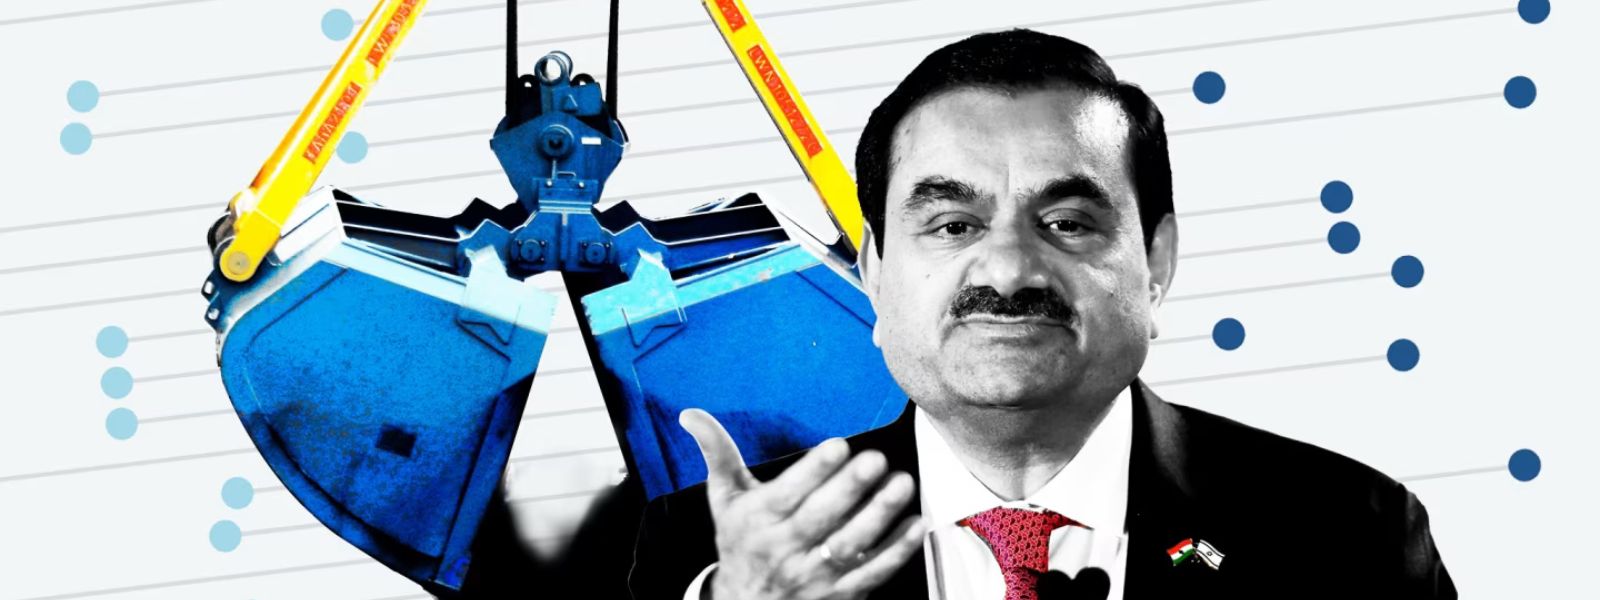 Adani suspected of fraud by selling low-grade coal